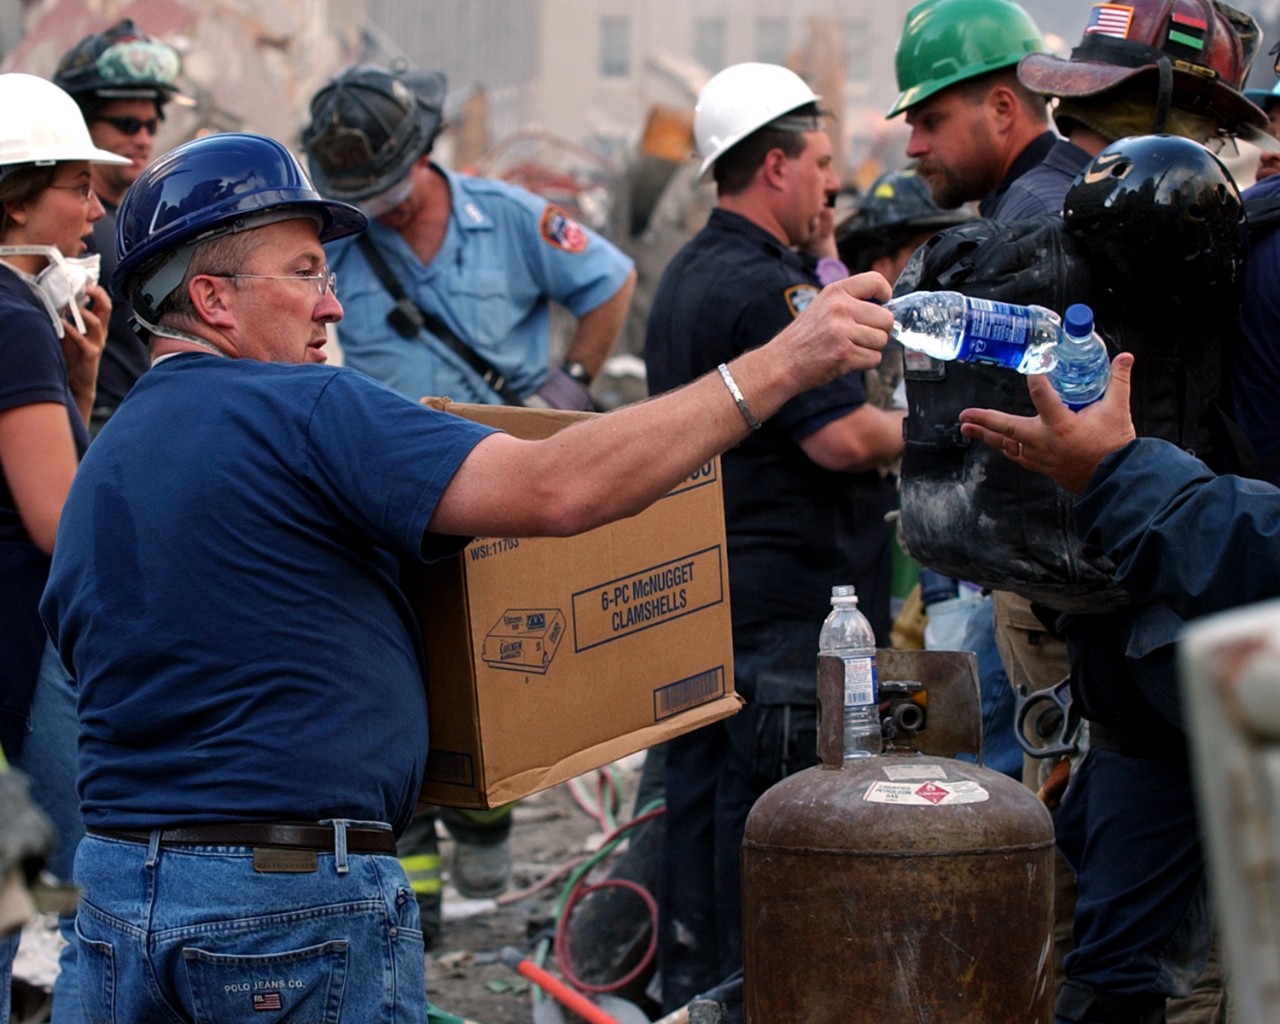 Volunteers distribute water to personnel involved in the search and rescue efforts at the World Trade Center, 16 September 2001